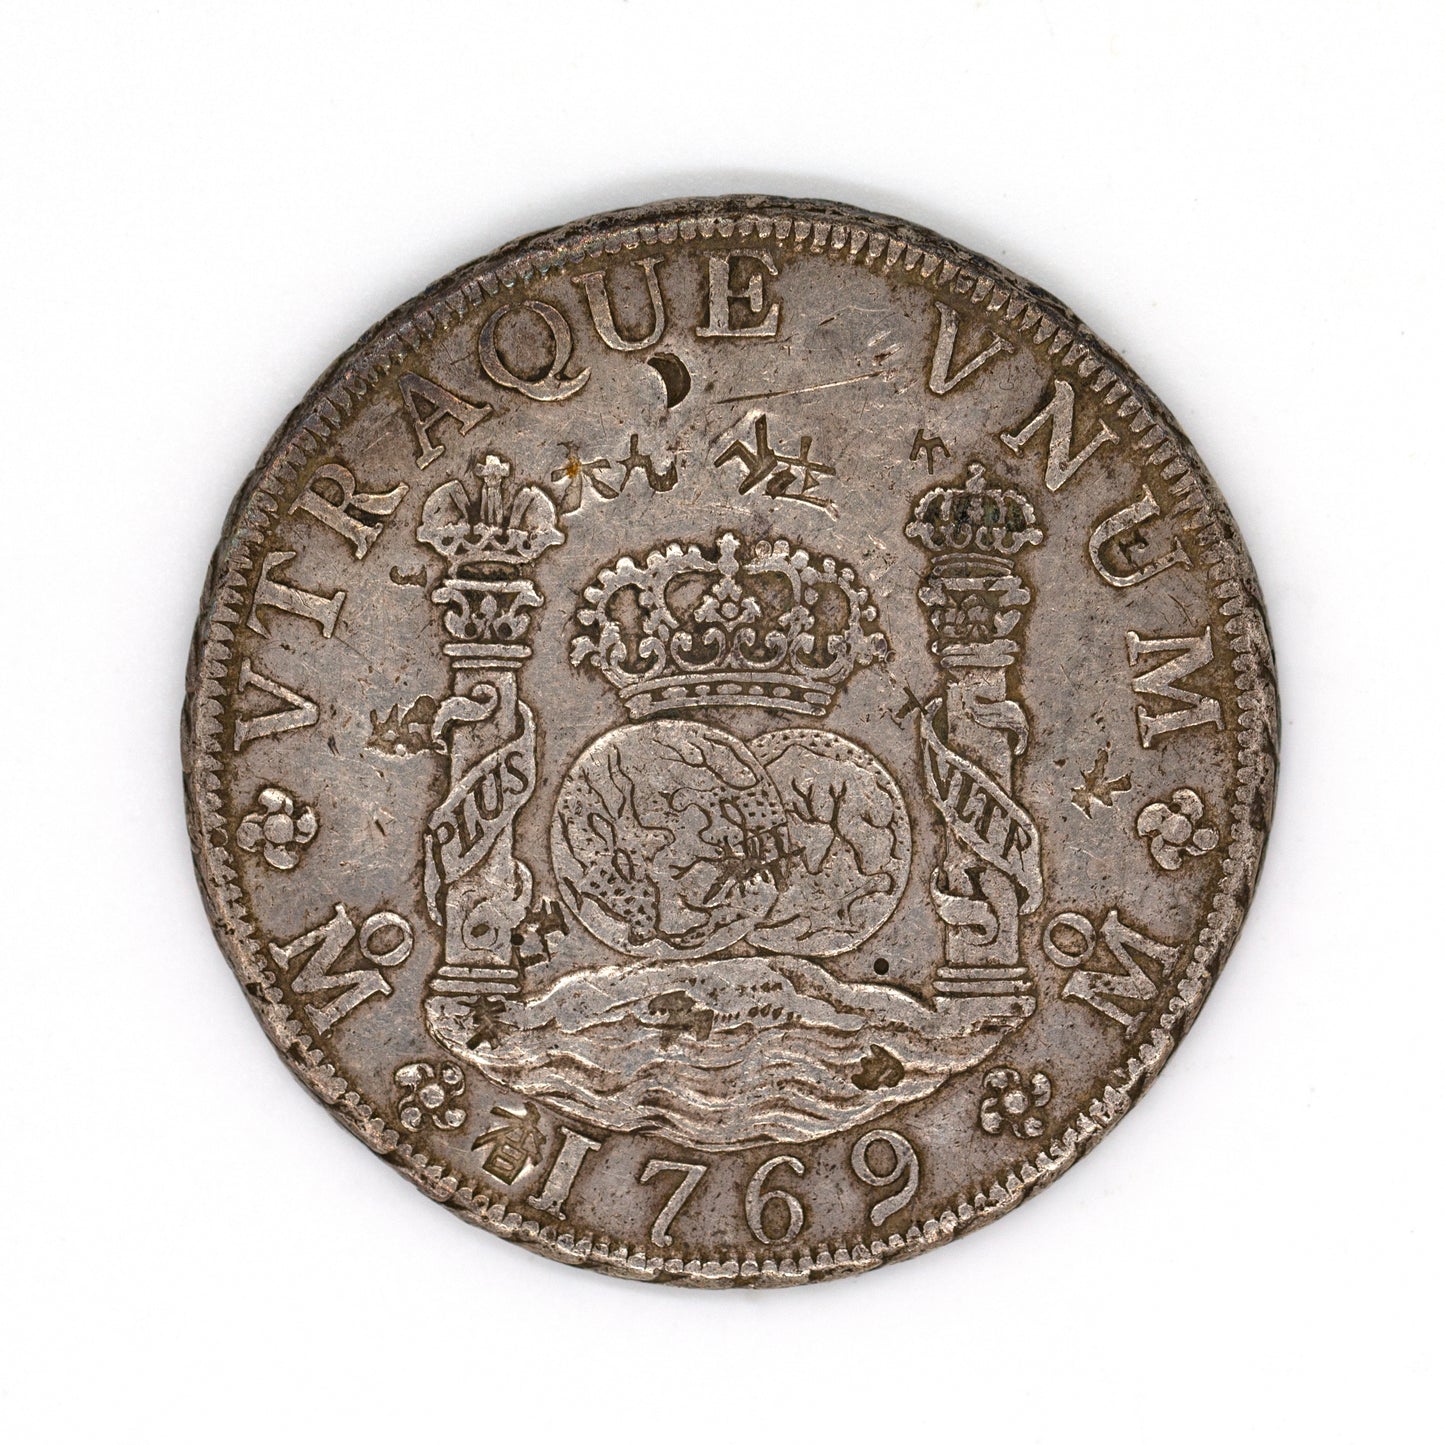 CHARLES III 8 Reales 1769 Mexico